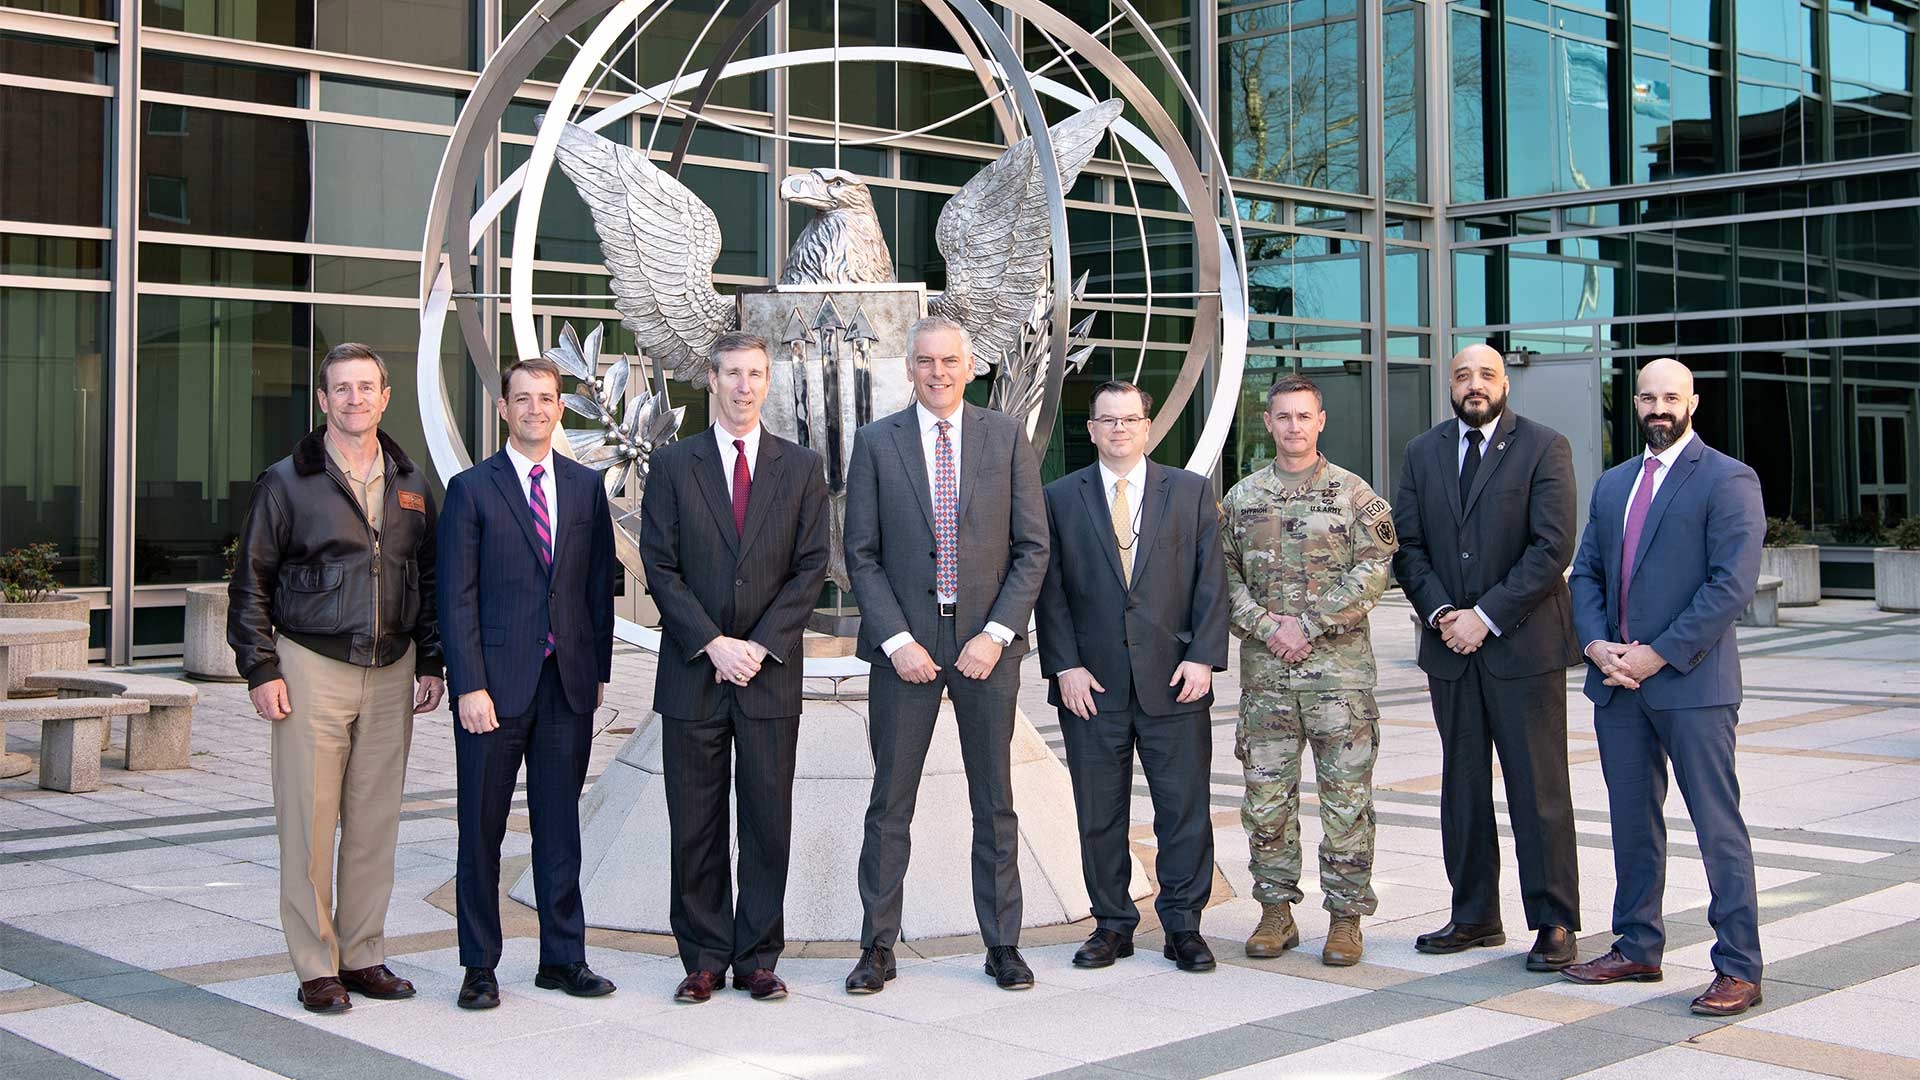 Mr. Matthew Axelrod, Assistant Secretary for Export Enforcement at the U.S. Department of Commerce’s Bureau of Industry and Security visits Acting Director Rhys Williams and DTRA senior leaders.